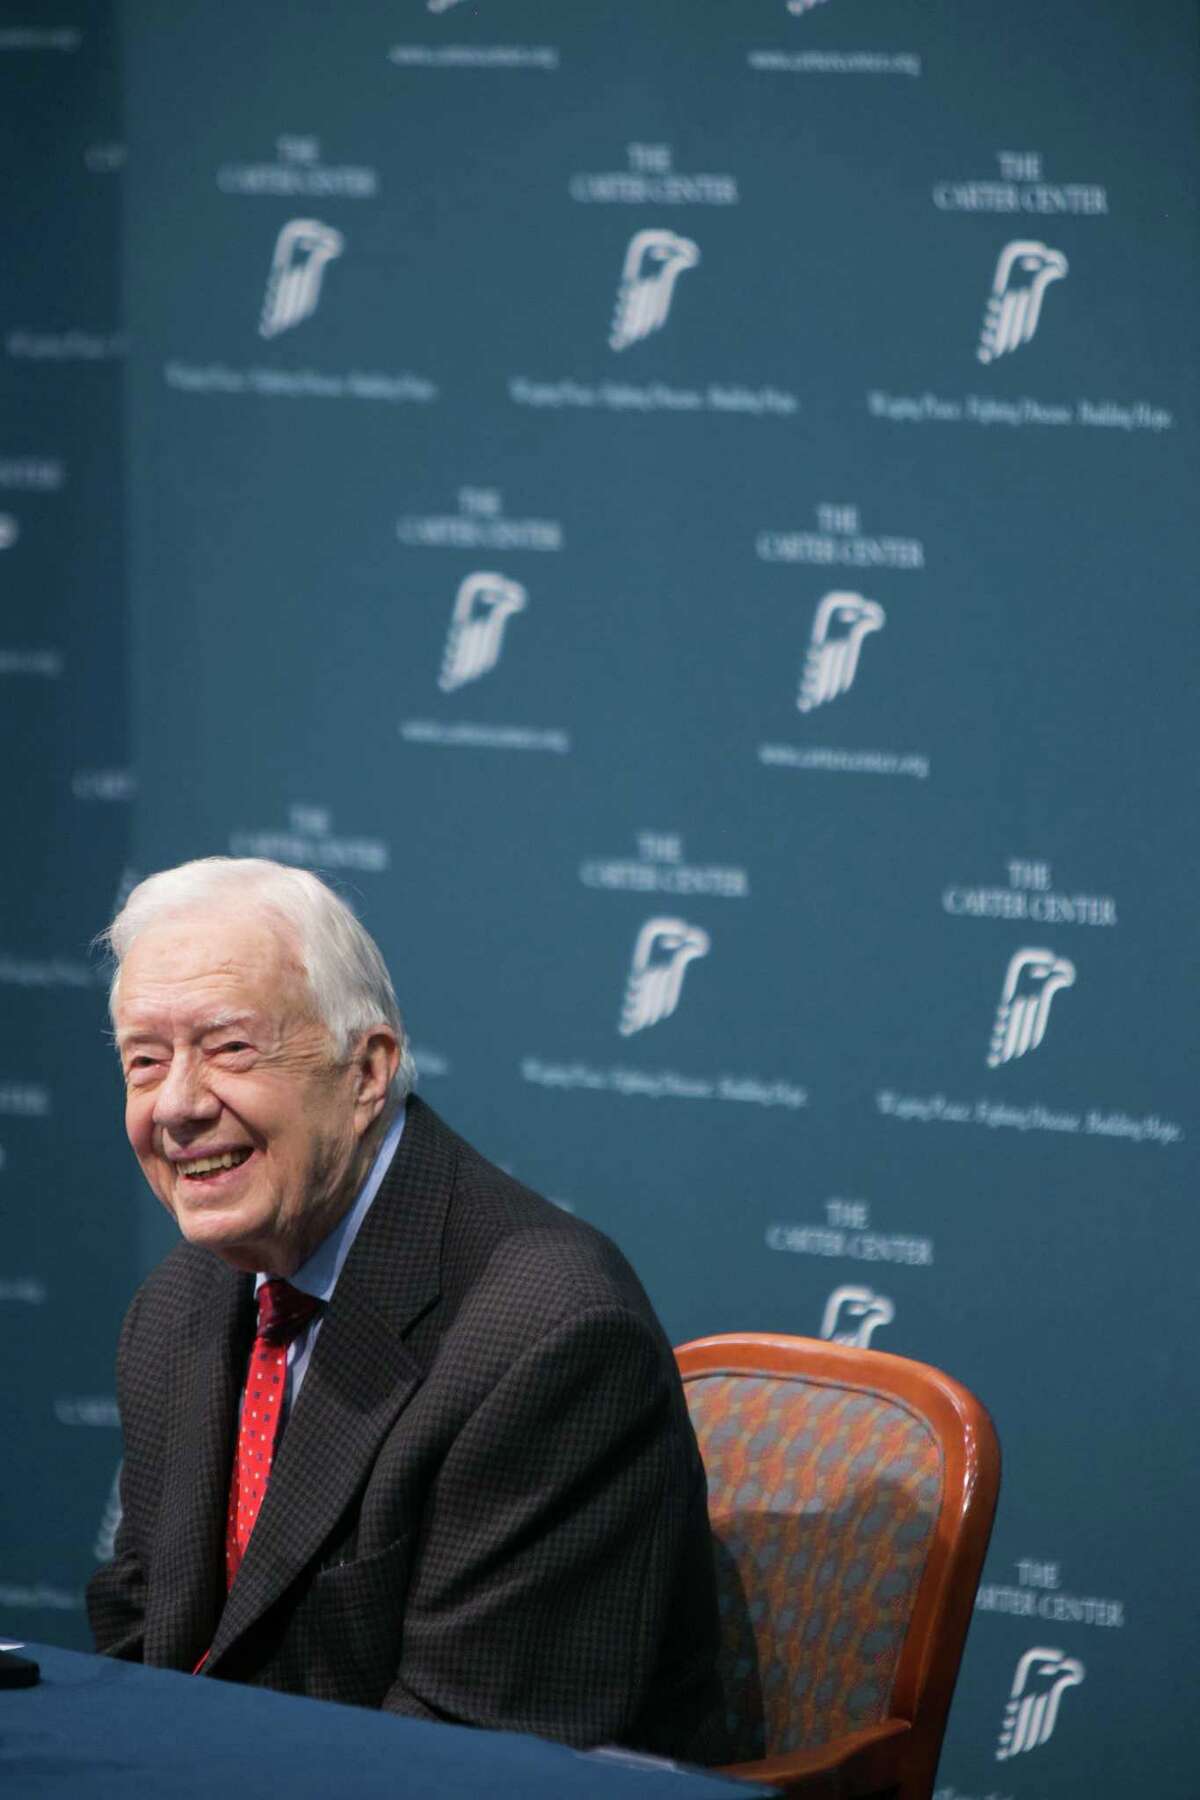 ATLANTA, GA - AUGUST 20: Former President Jimmy Carter discusses his cancer diagnosis during a press conference at the Carter Center on August 20, 2015 in Atlanta, Georgia. Carter confirmed that he has melanoma that has spread to his liver and brain and will start treatment today. (Photo by Jessica McGowan/Getty Images)